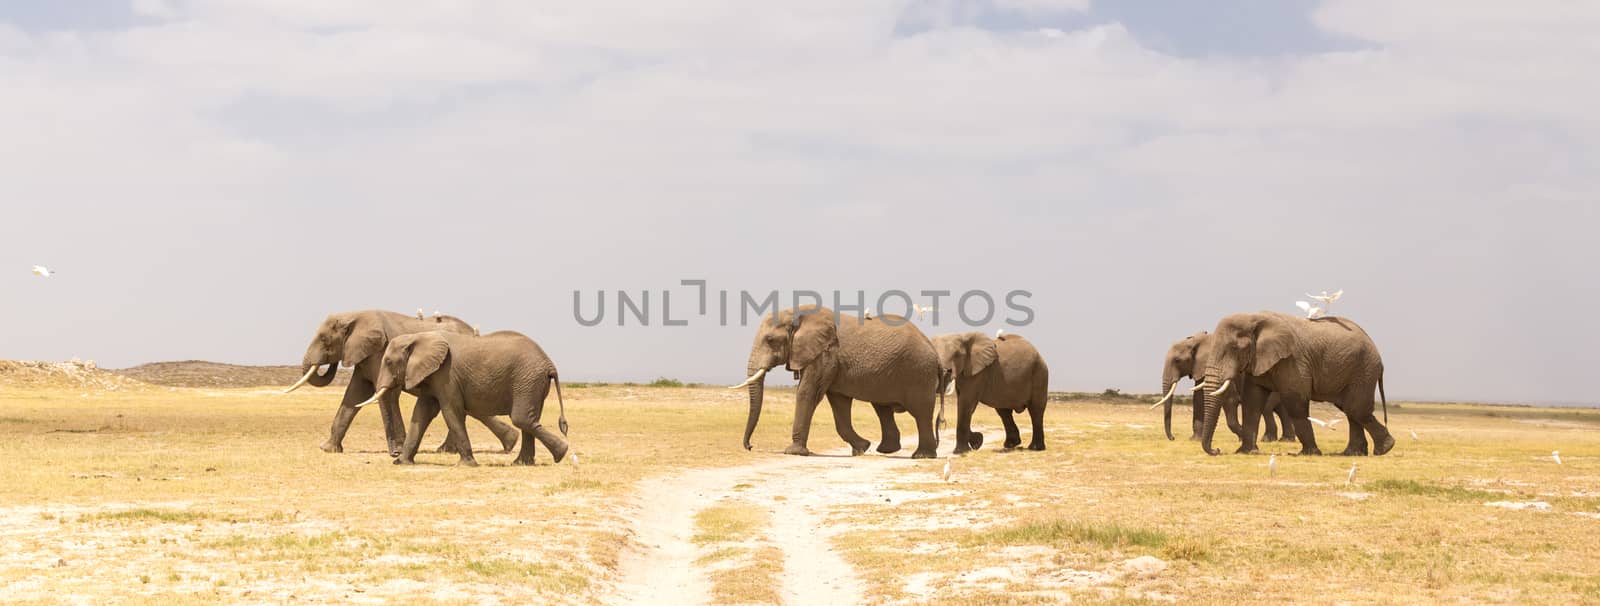 Herd of elephants crossing dirt road at Amboseli National Park, formerly Maasai Amboseli Game Reserve, is in Kajiado District, Rift Valley Province in Kenya.